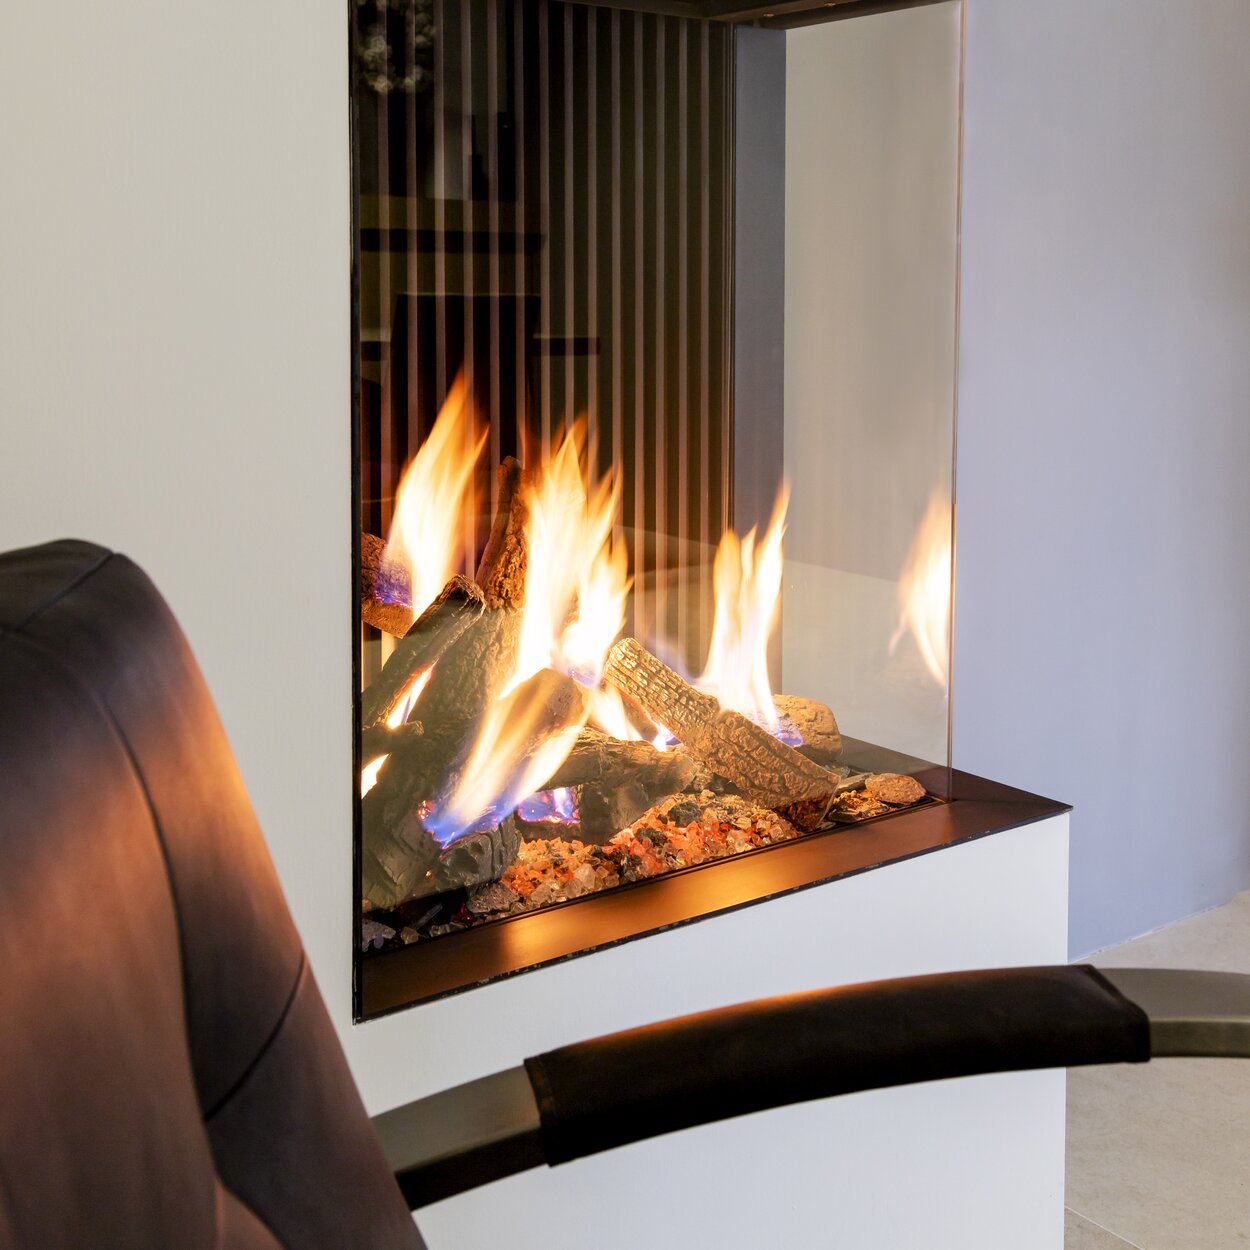 Gas fireplace GP65/75C corner version with white panelling and ceramic wood logs